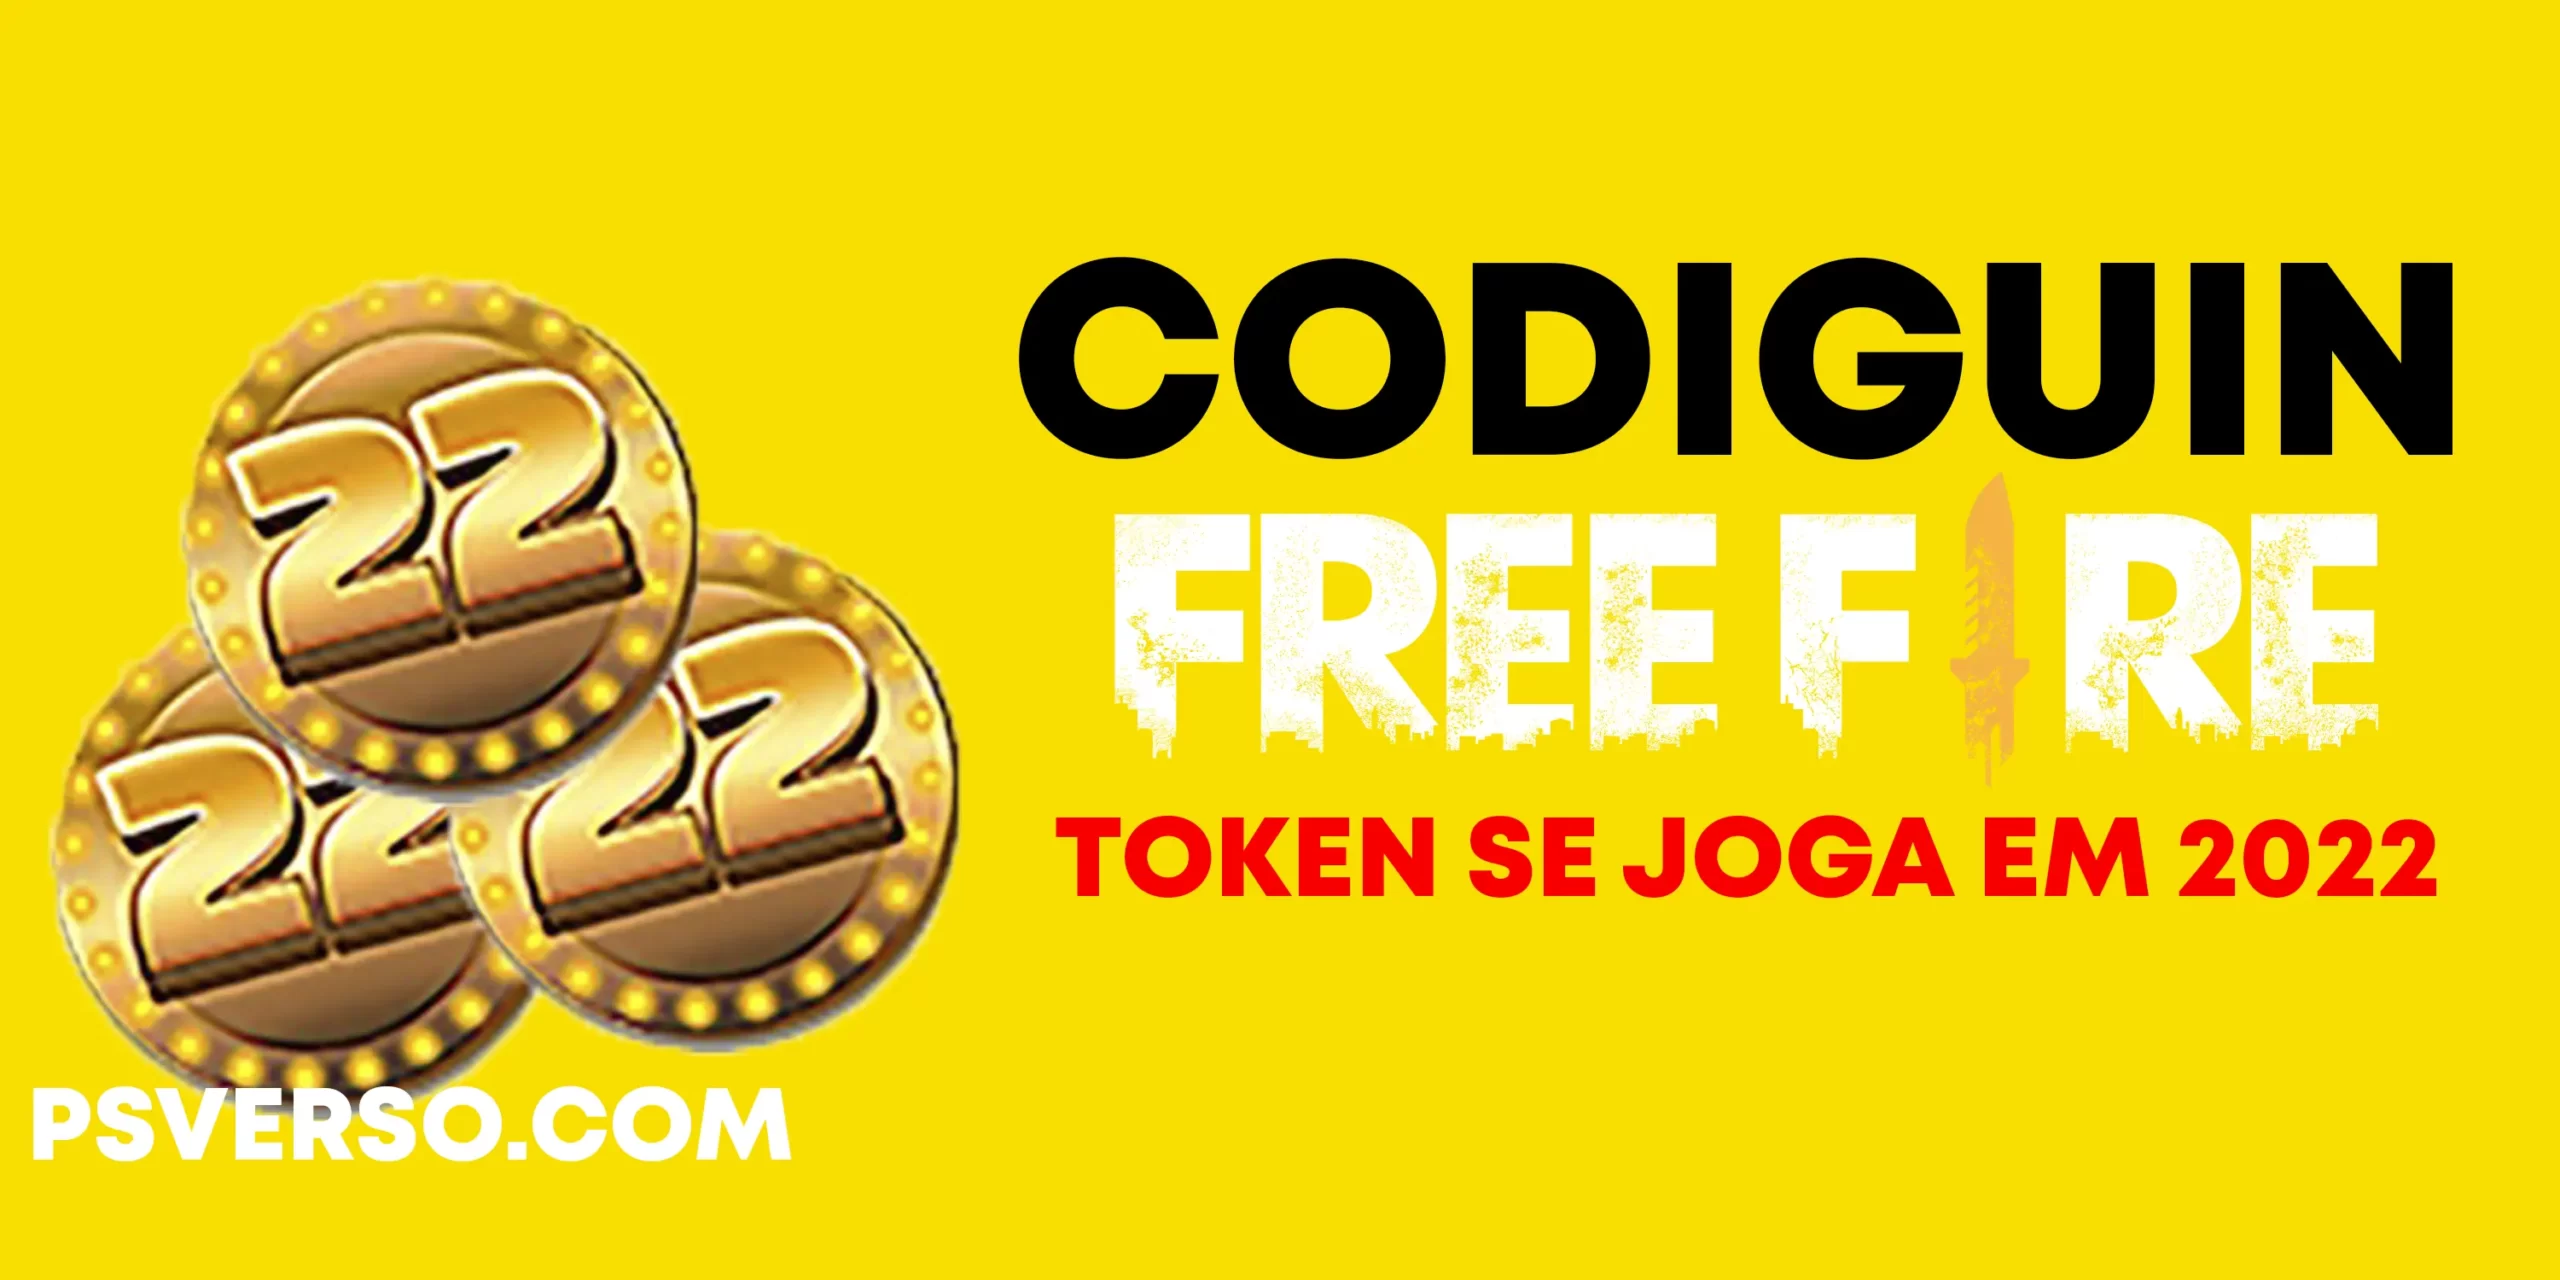 codeign ff token 2022.  is played in